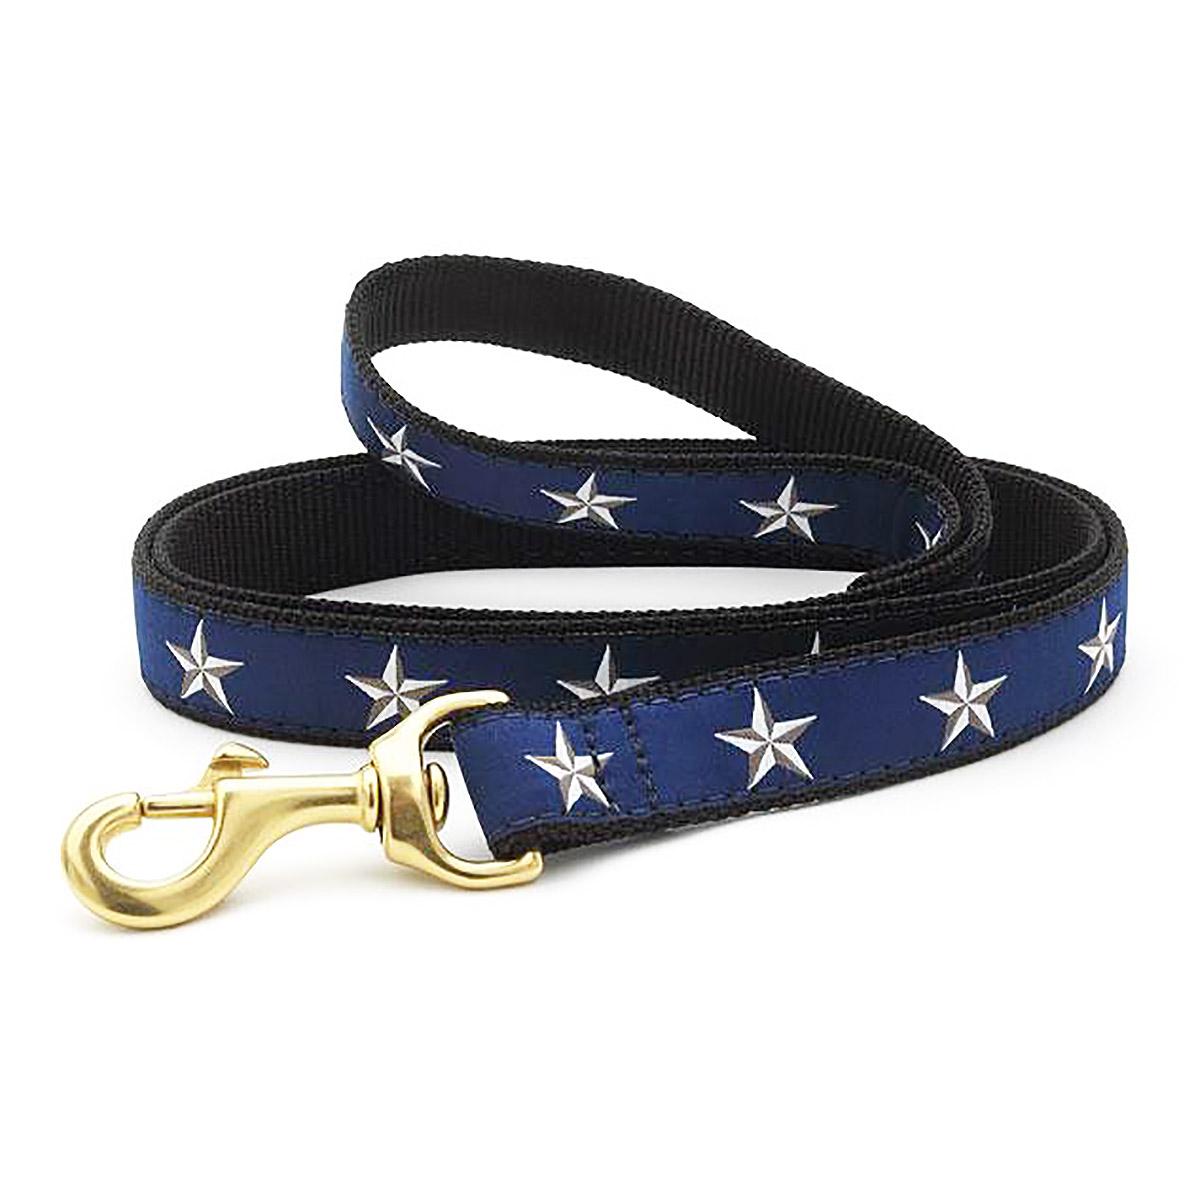 North Star Dog Leash by Up Country